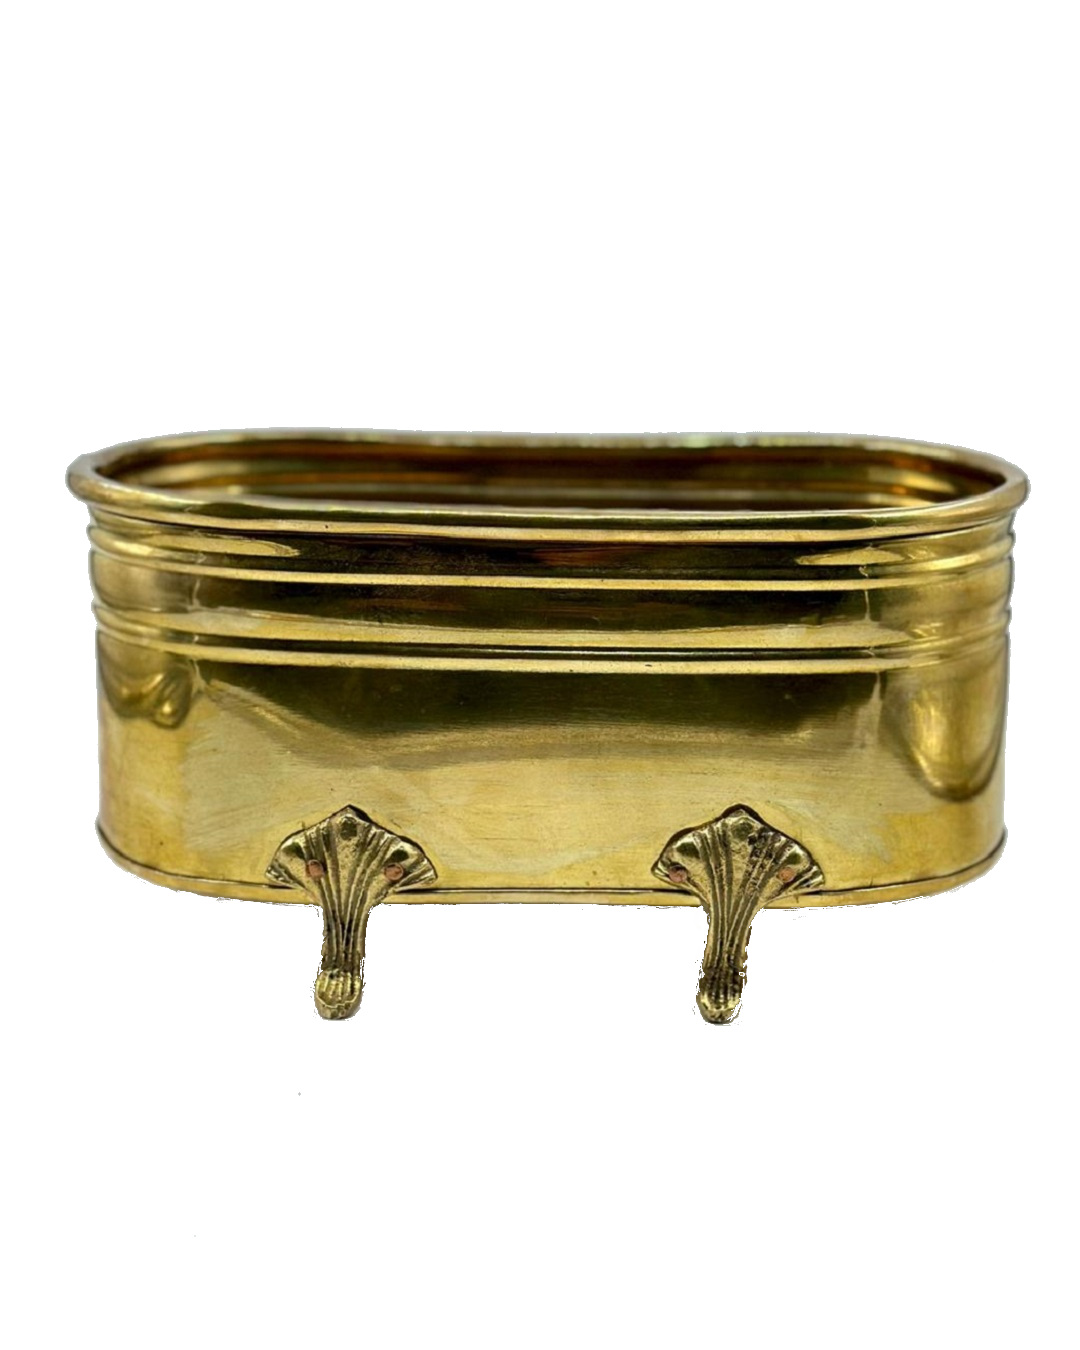 Brass vessel collectable with feet